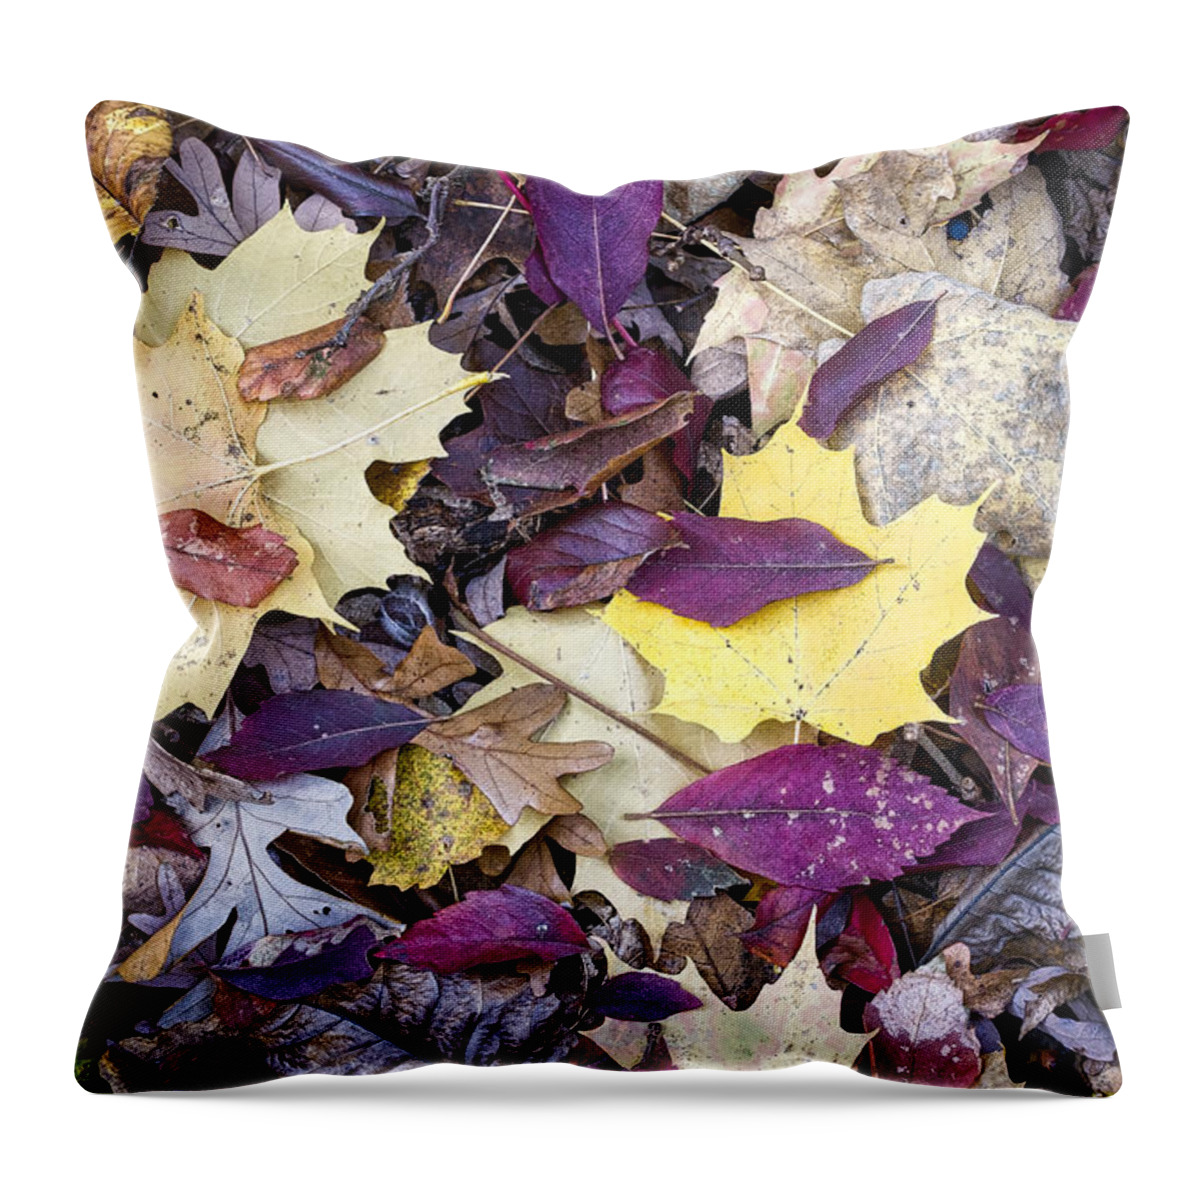 Arboretum Throw Pillow featuring the photograph Fall Leaves - UW Arboretum - Madison - Wisconsin by Steven Ralser